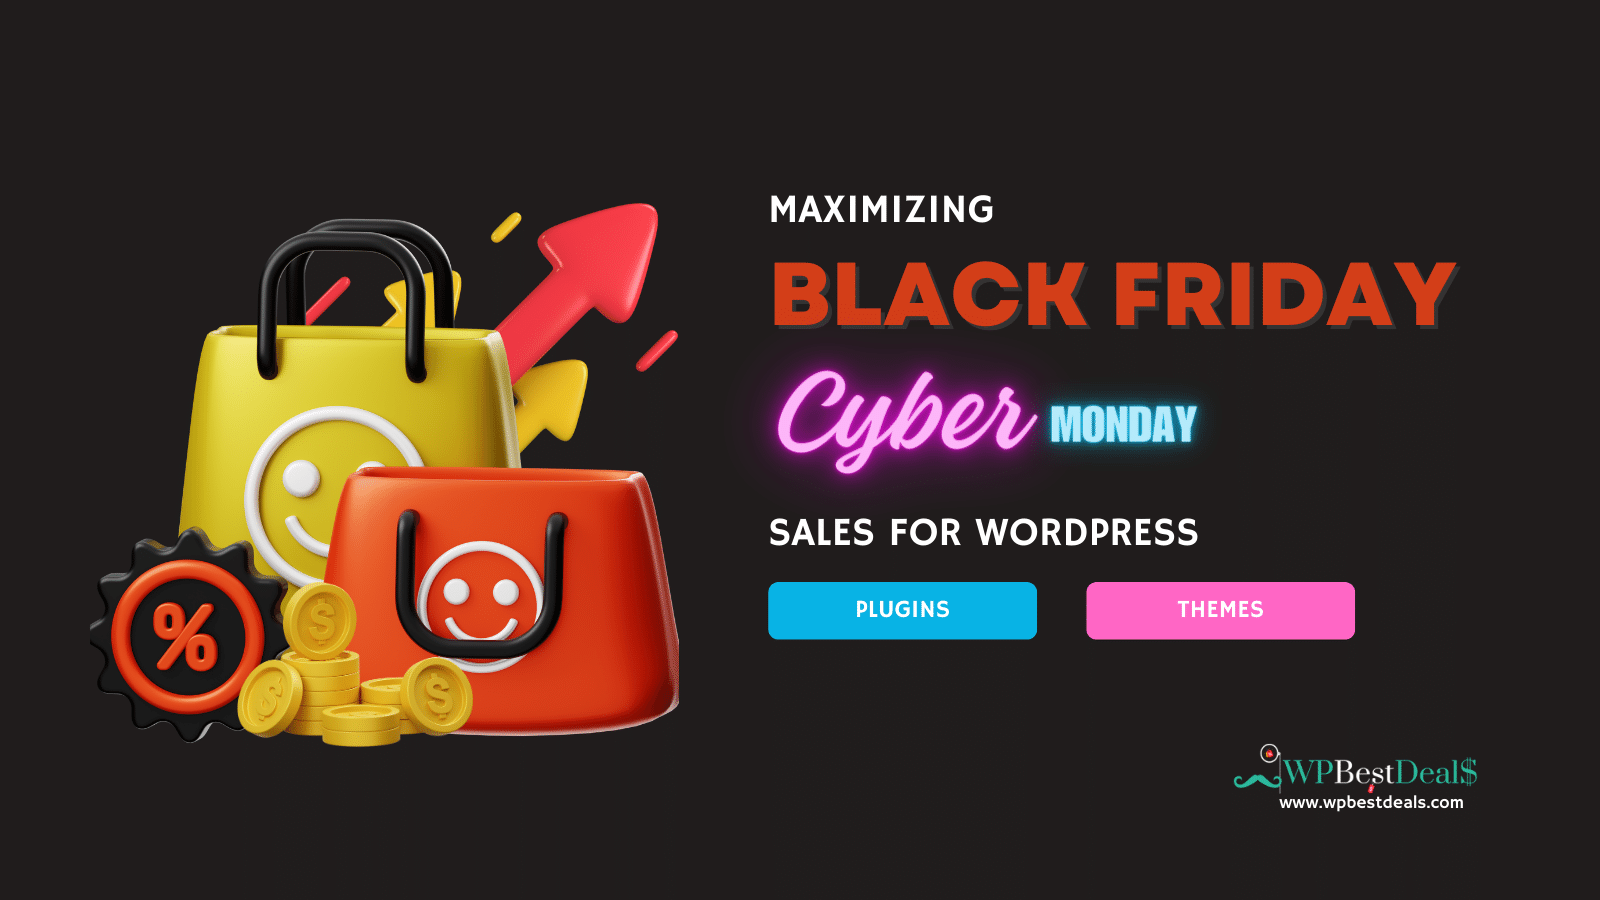 increase the sale of WP plugins and themes in BFCM